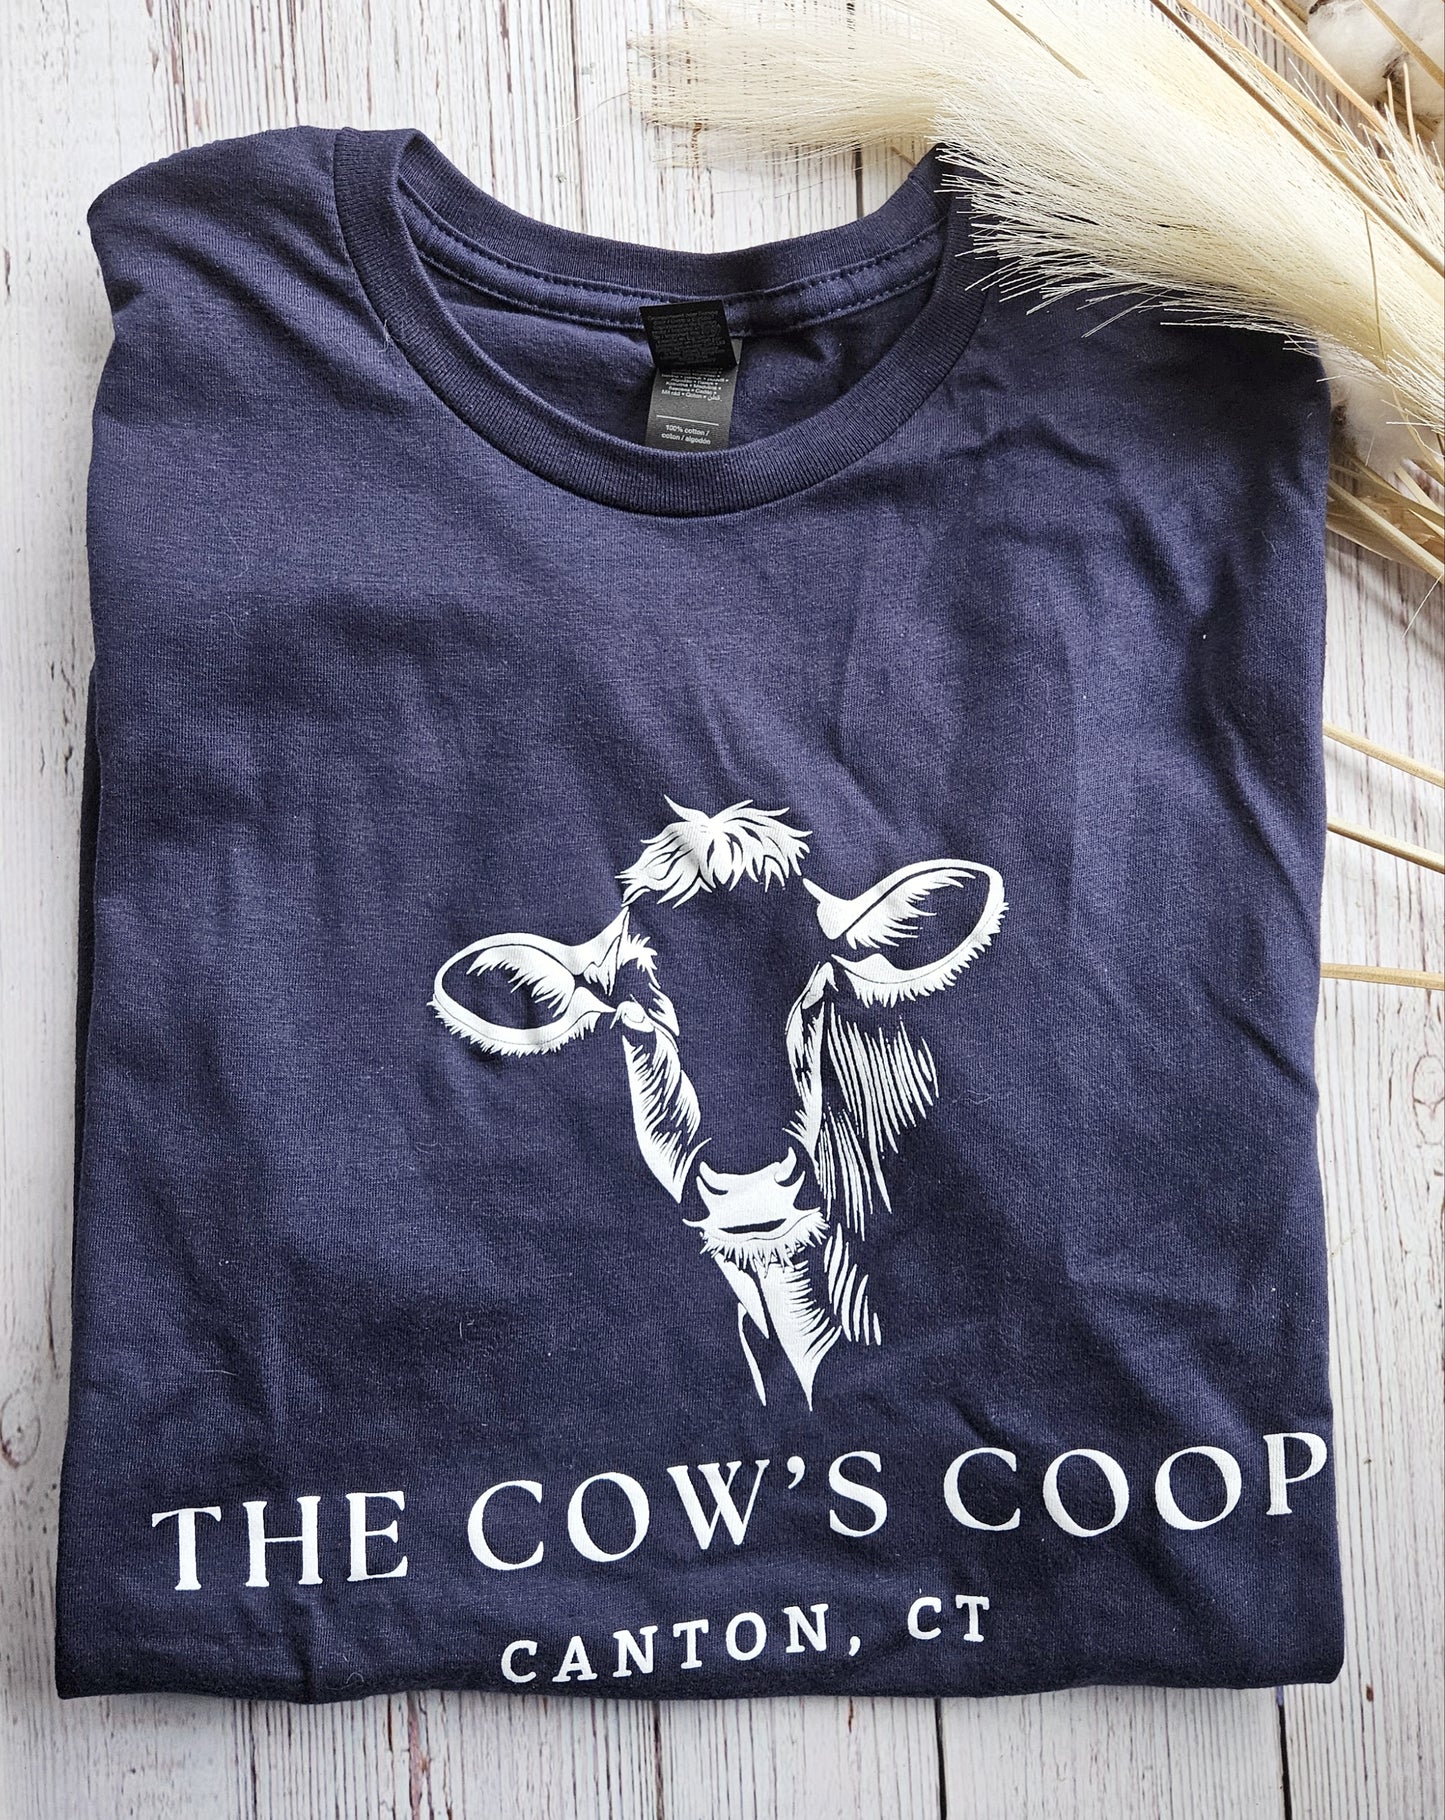 "The Cow's Coop" T-Shirt